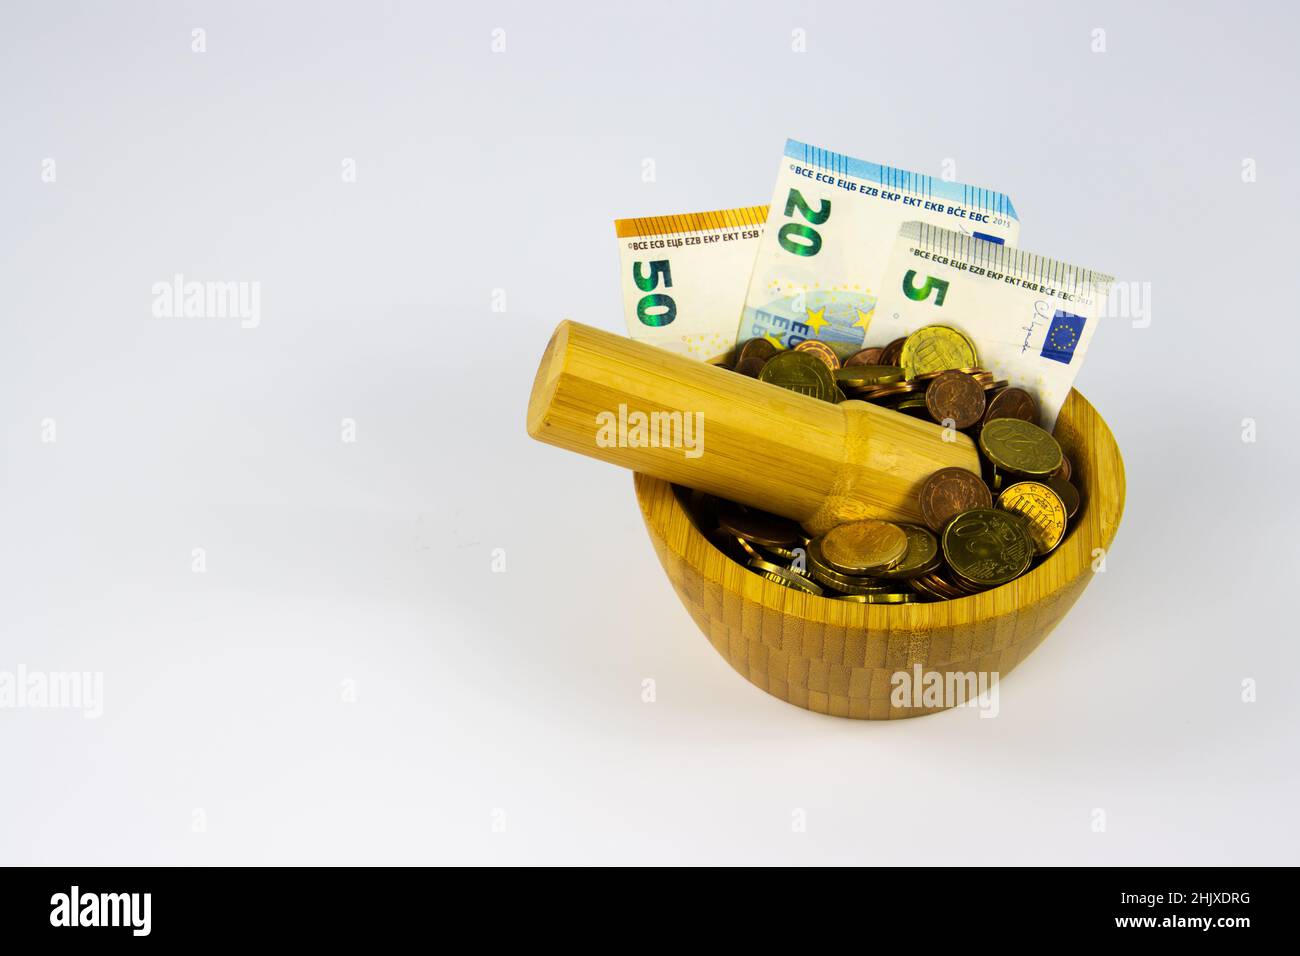 Financial Concept of Inflation - Euro Bills crushed to coins in a mortar grinded by a pestle with copy space Stock Photo